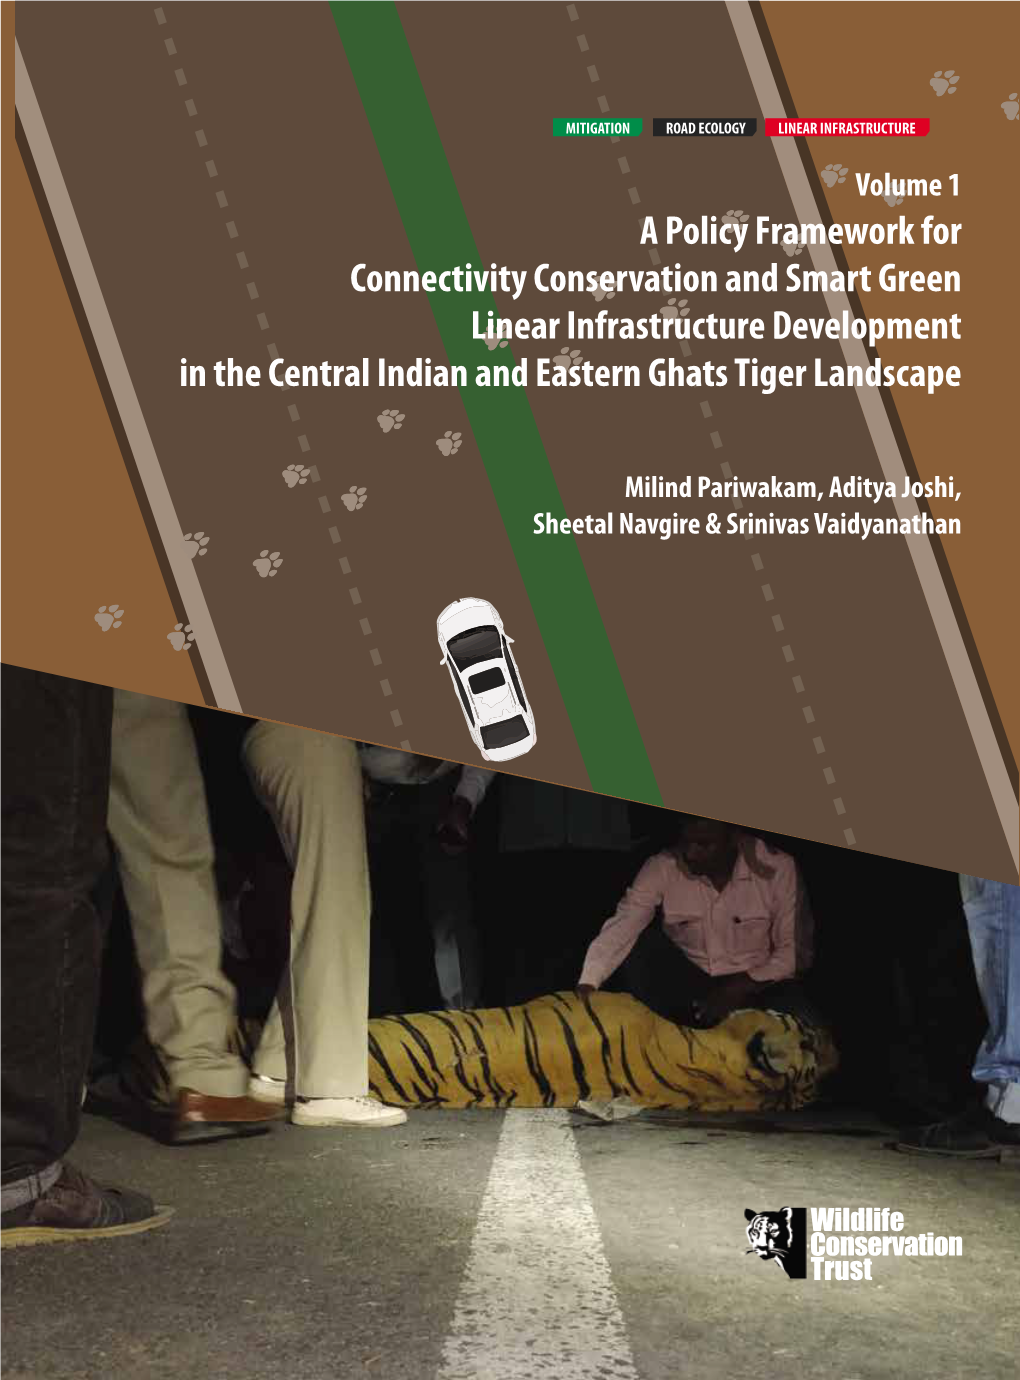 A Policy Framework for Connectivity Conservation and Smart Green Linear Infrastructure Development in the Central Indian and Eastern Ghats Tiger Landscape